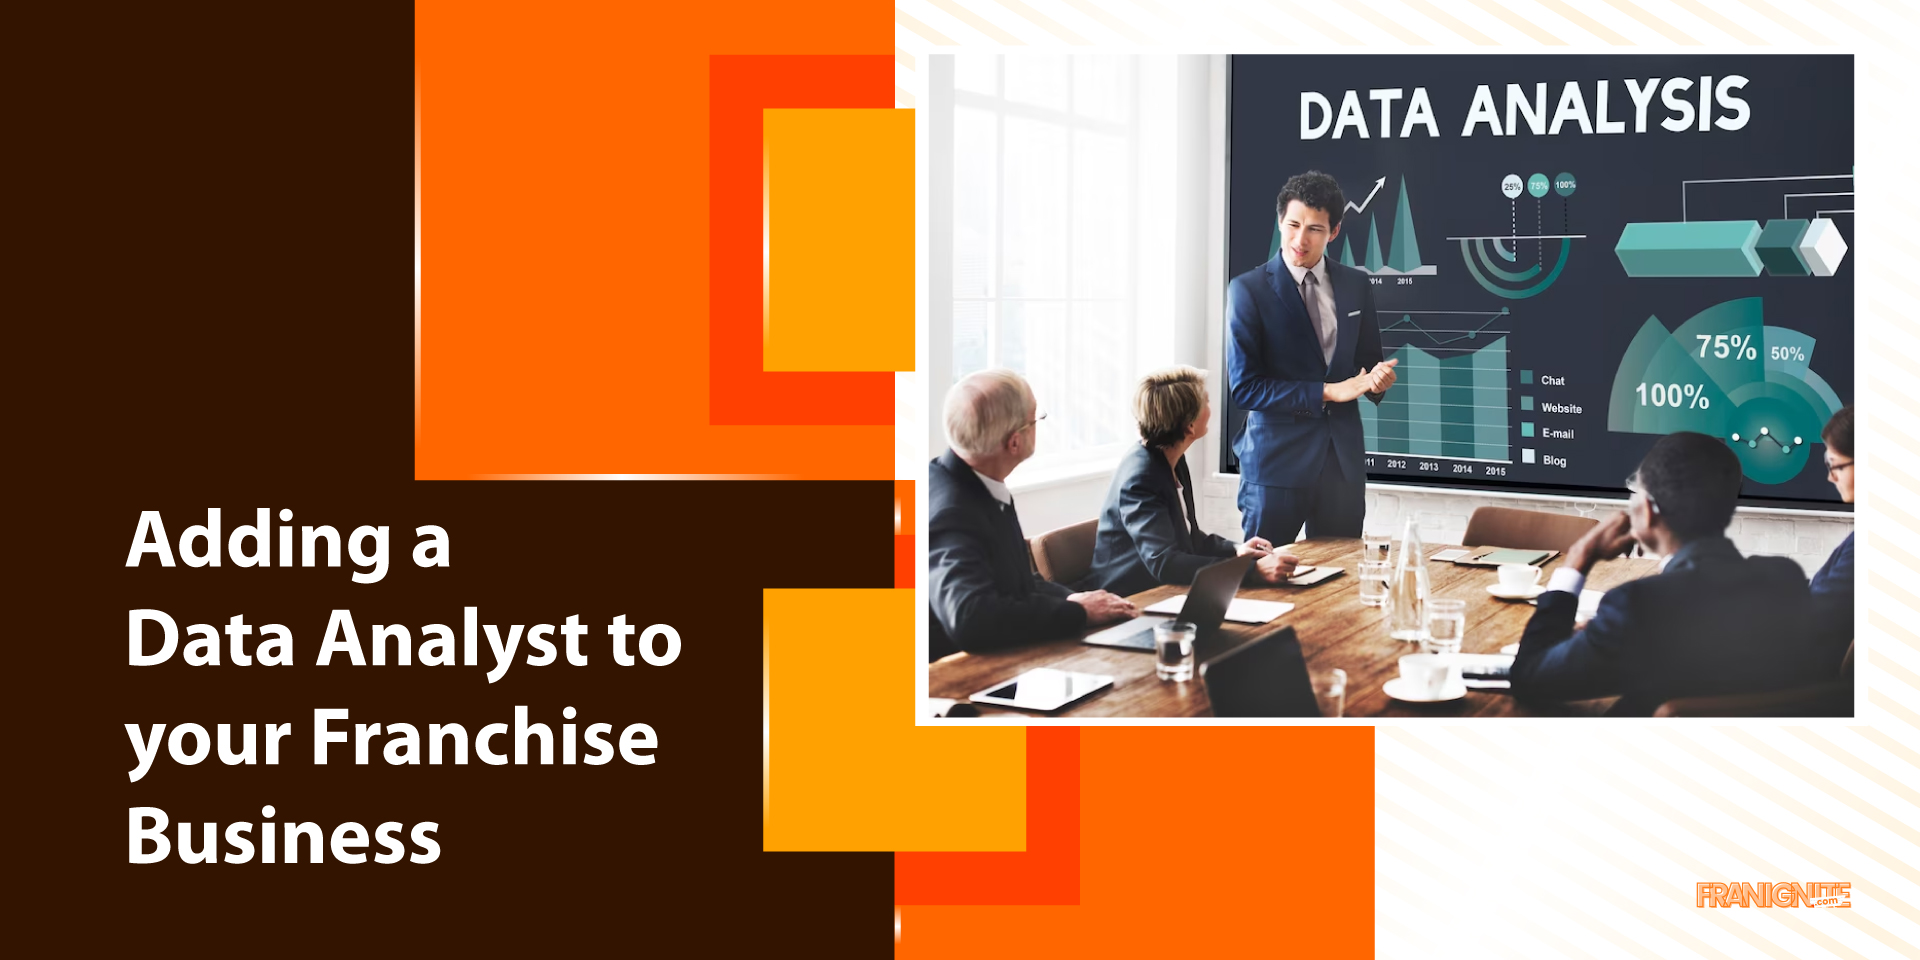 Adding a Data Analyst to your Franchise Business